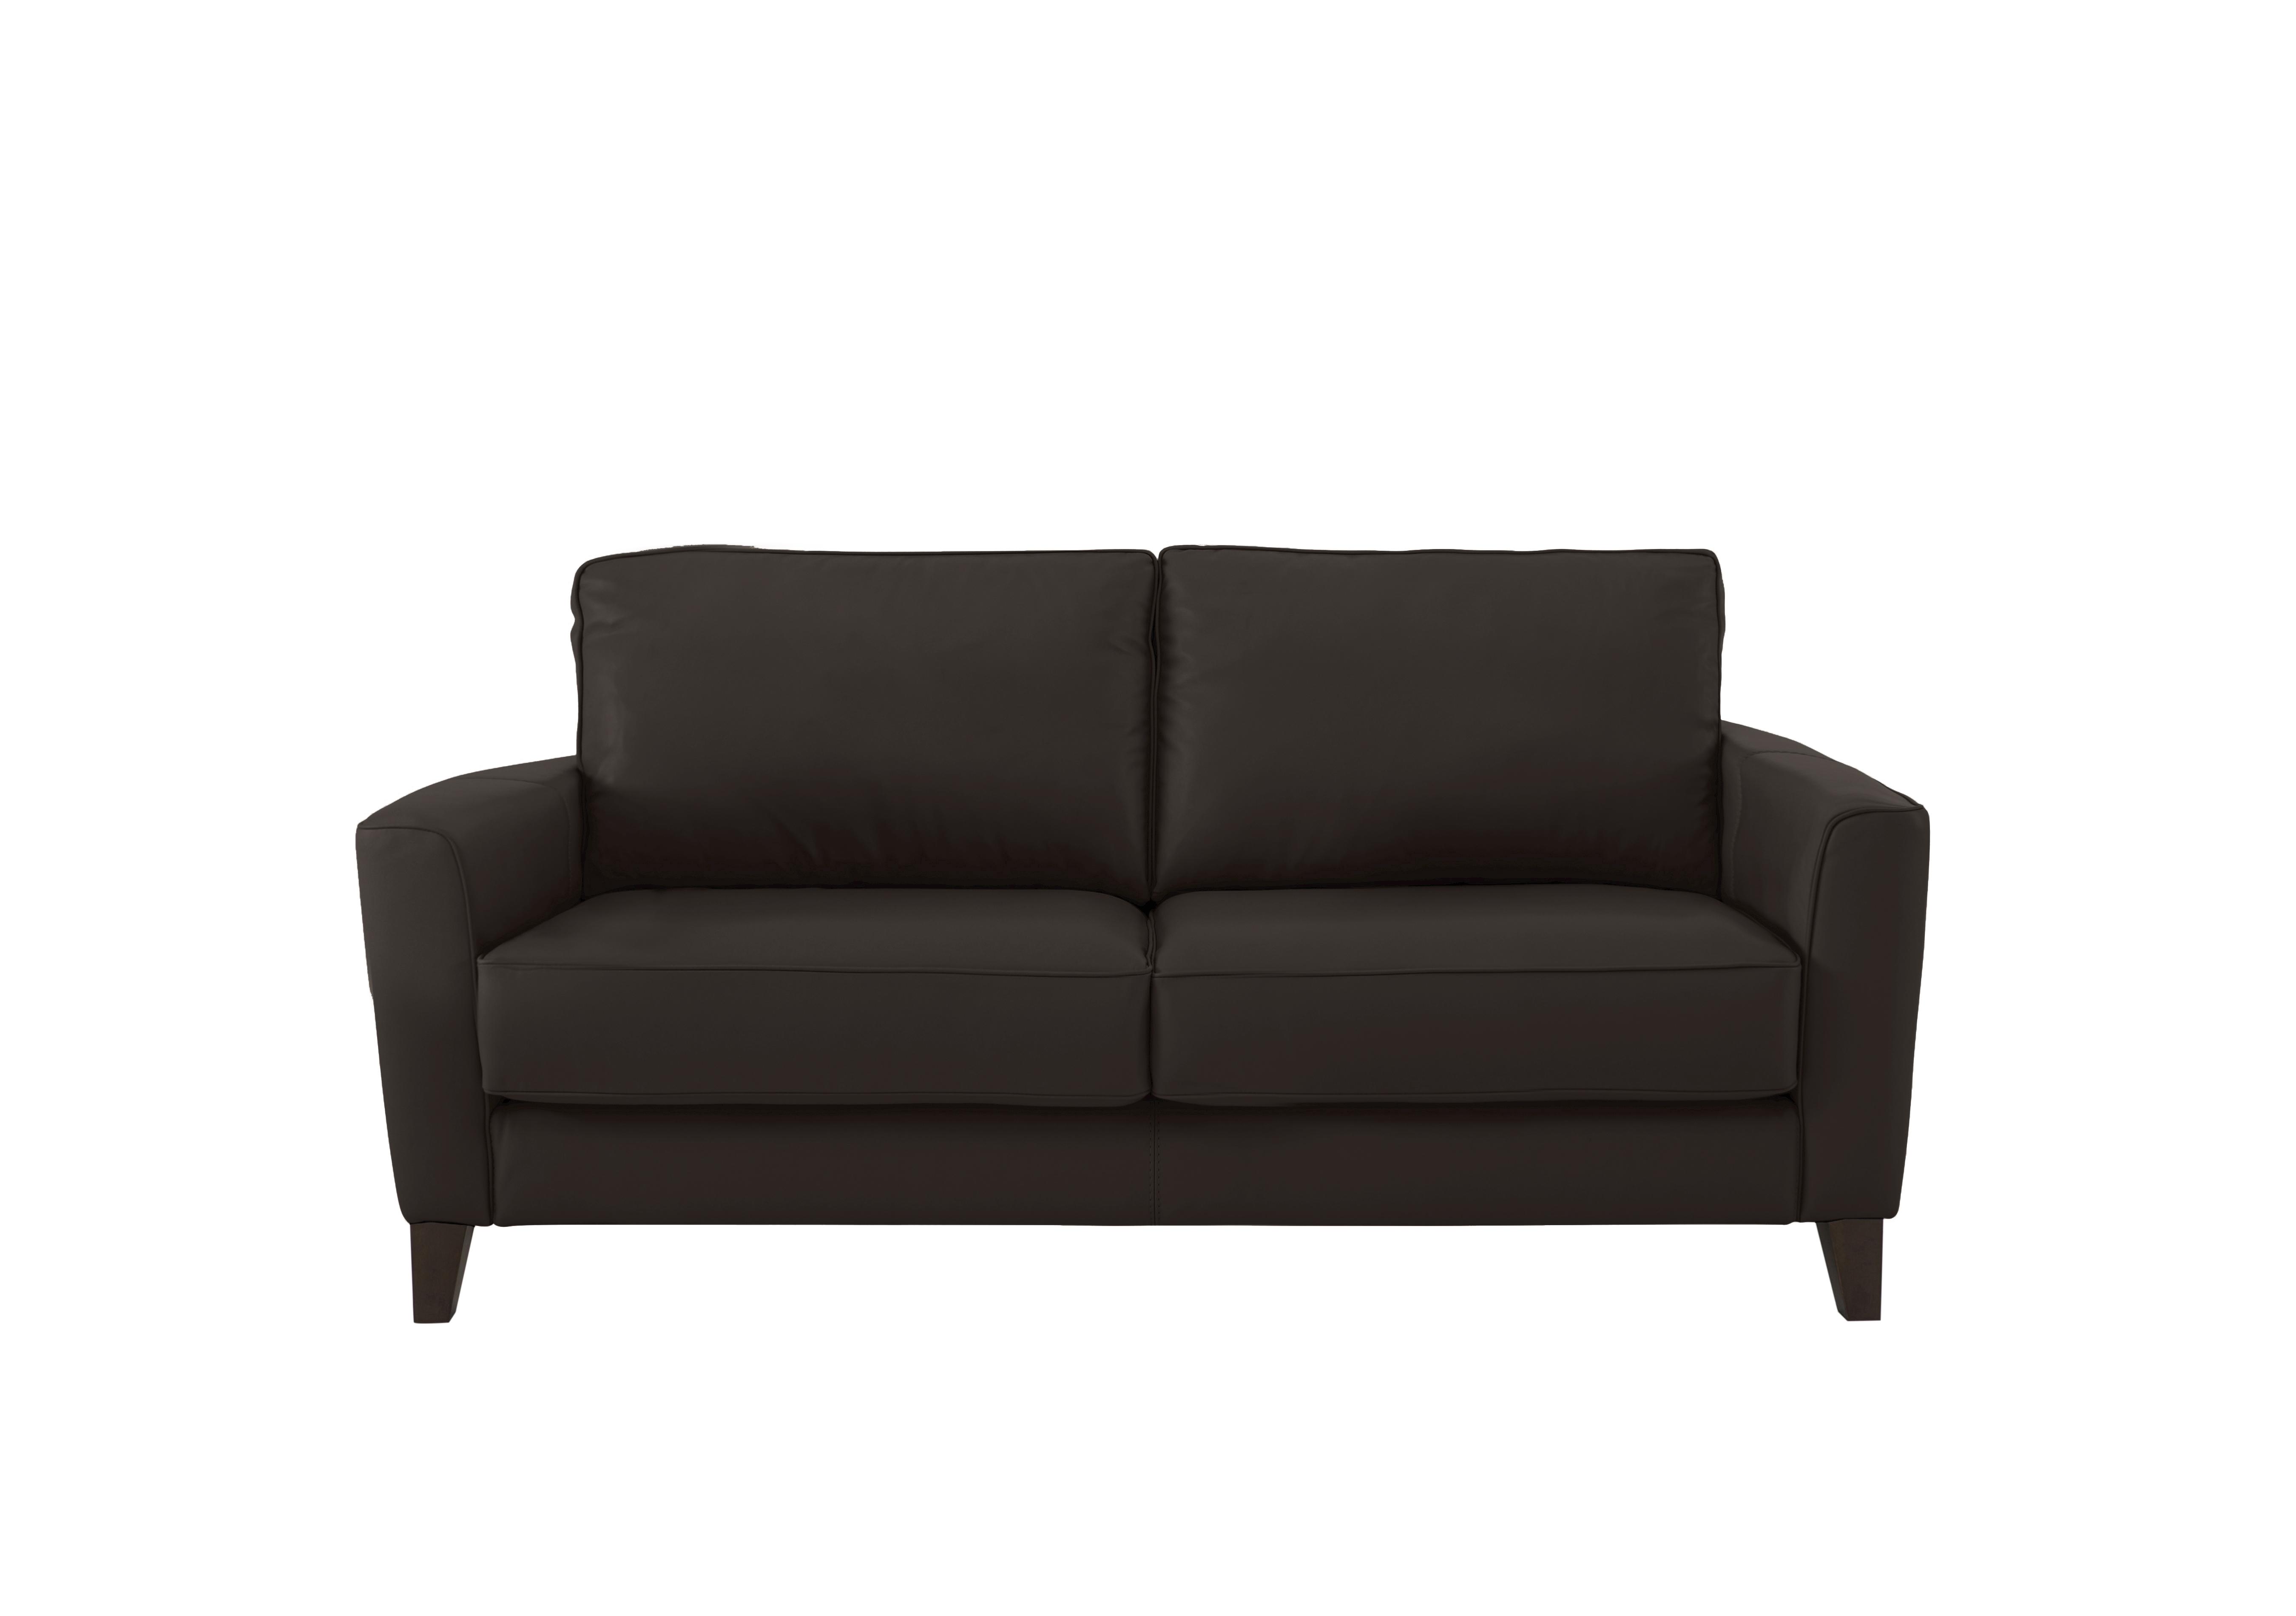 Brondby 2 Seater Leather Sofa in Bv-1748 Dark Chocolate on Furniture Village